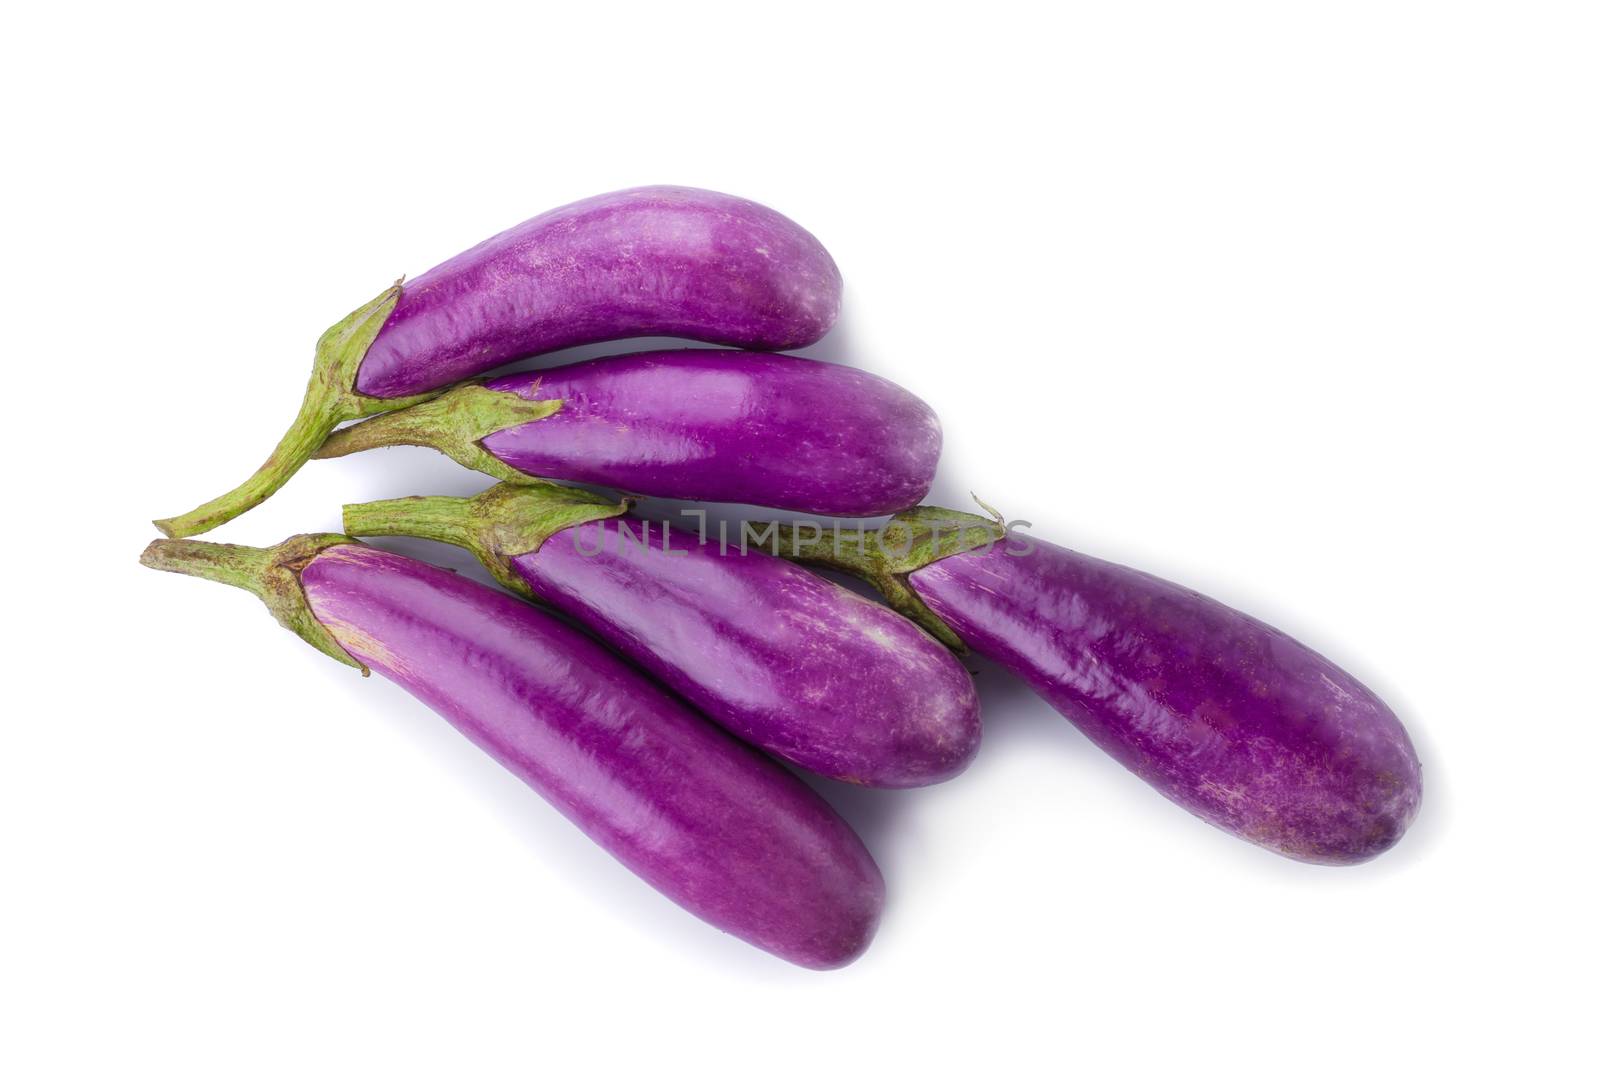 Eggplant or aubergine vegetable isolated on white background by kaiskynet